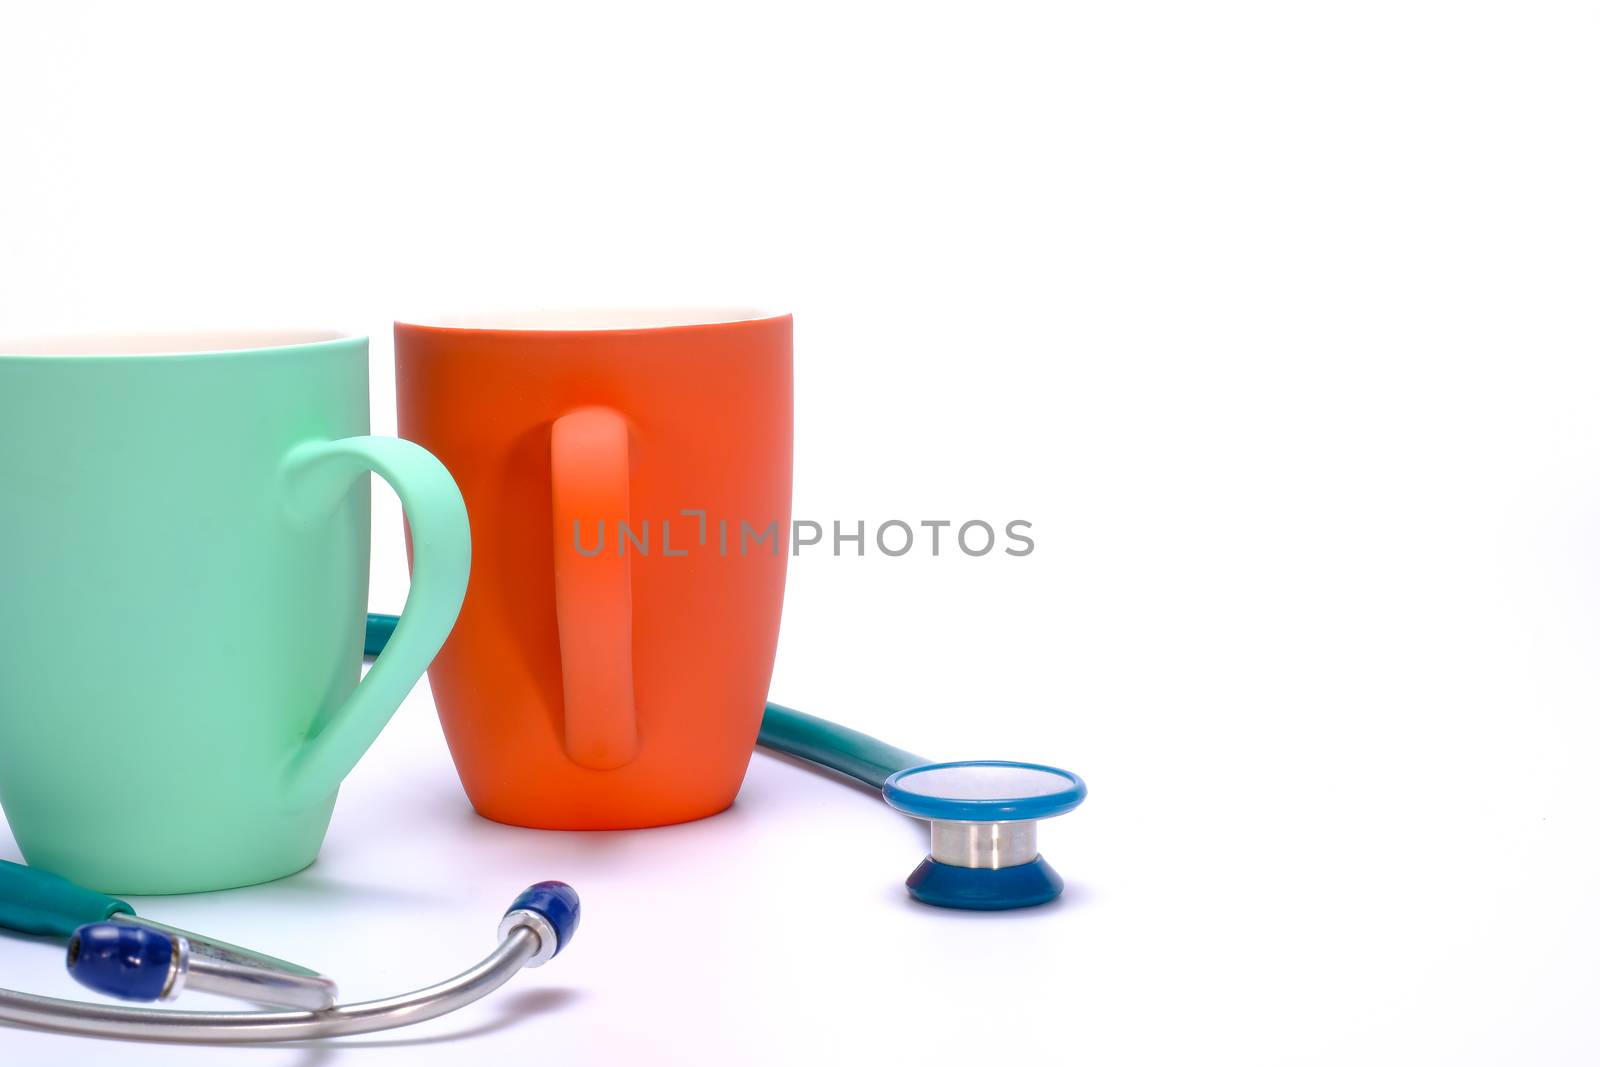 a green stethoscope and two green and orange coffee mugs on white background